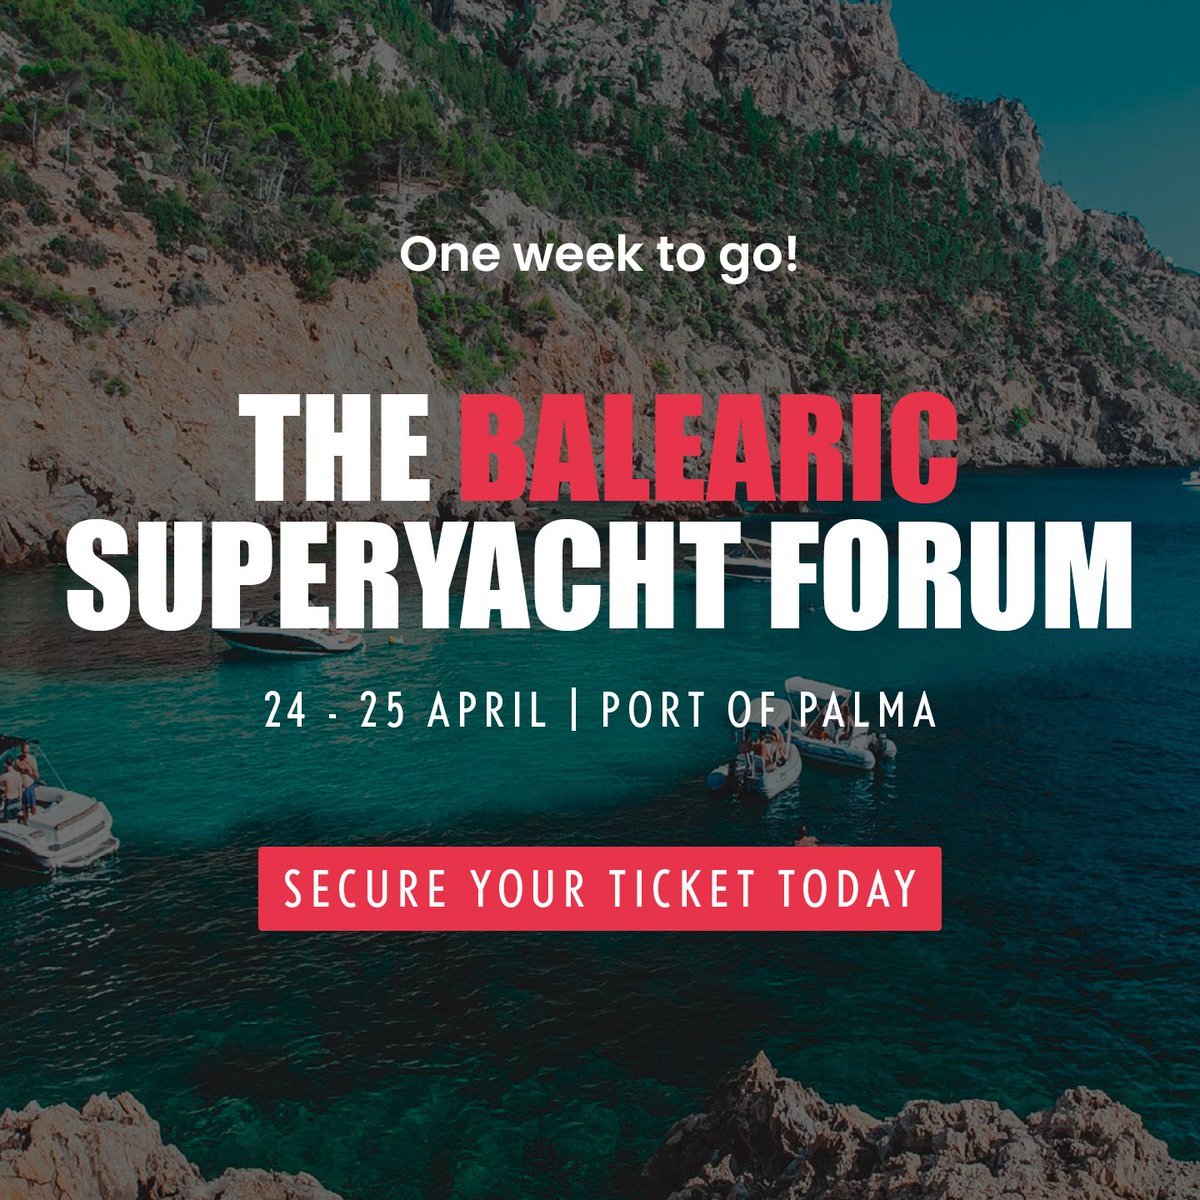 With exactly 1 week to go until #TheBalearicSuperyachtForum, the countdown is on! The Superyacht Group & the Balearic Marine Cluster will bring together the right experts to discuss the future of the Balearics as a key Superyacht Hub > bit.ly/3PnWsXP #Event #yachting